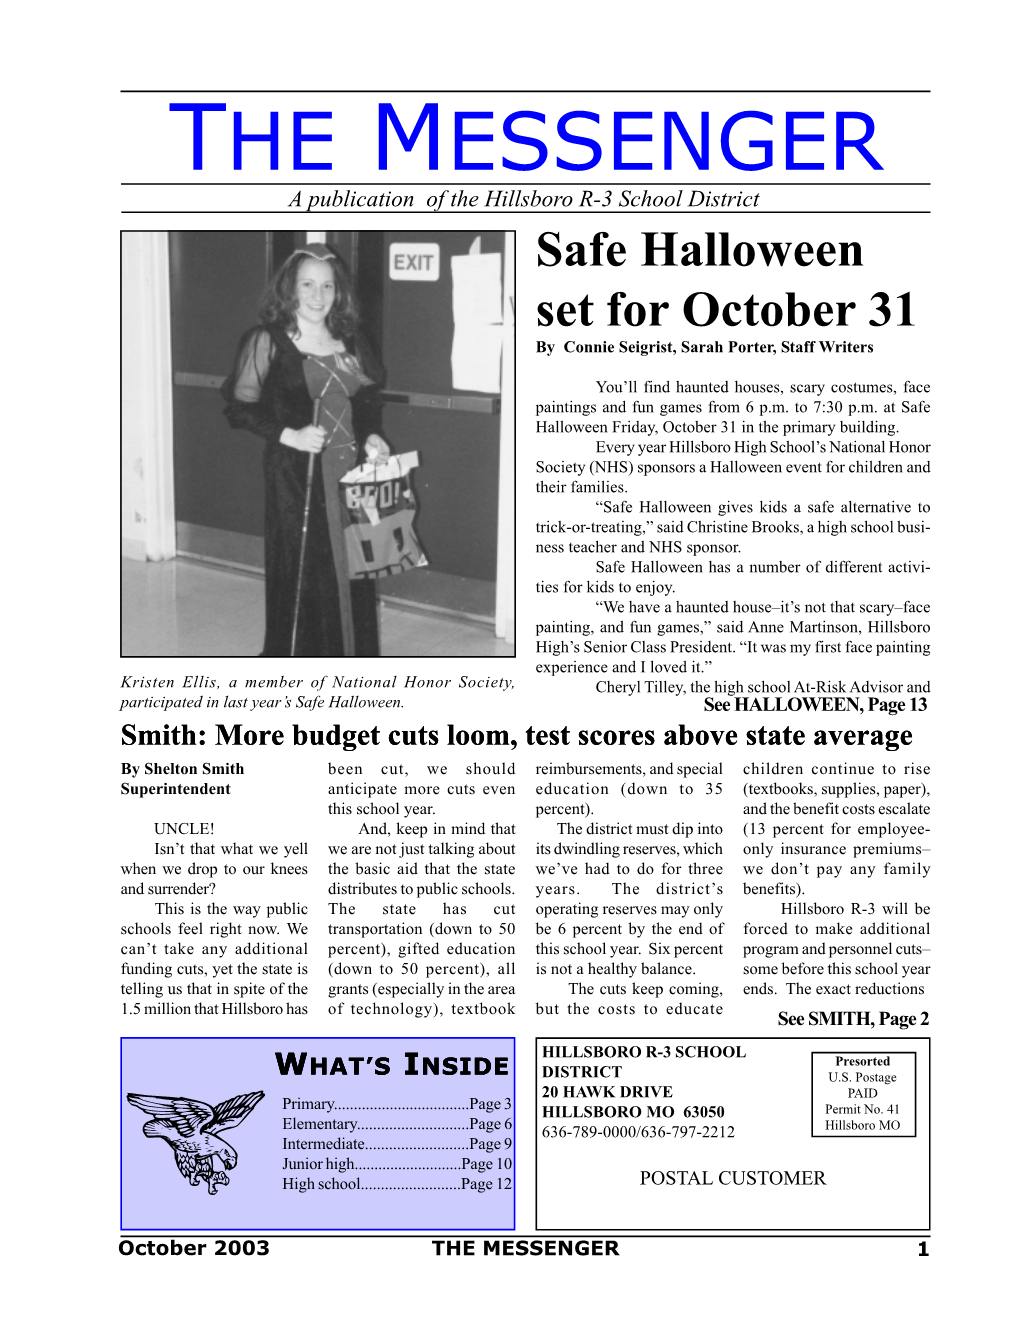 THE MESSENGER a Publication of the Hillsboro R-3 School District Safe Halloween Set for October 31 by Connie Seigrist, Sarah Porter, Staff Writers